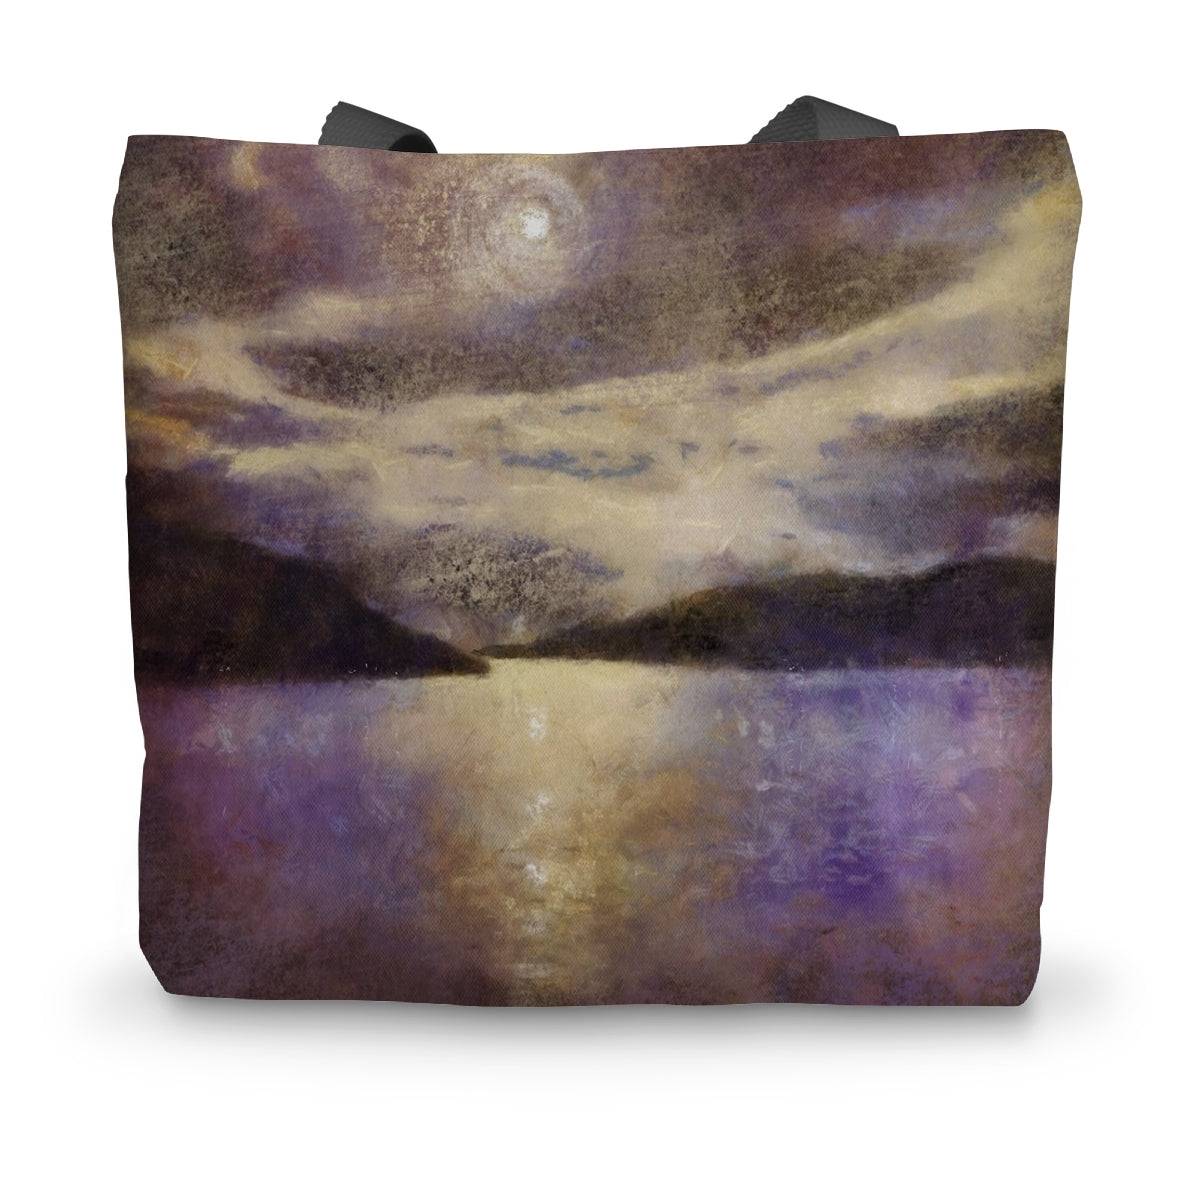 Moonlight Meets Lewis & Harris Art Gifts Canvas Tote Bag-Bags-Hebridean Islands Art Gallery-14"x18.5"-Paintings, Prints, Homeware, Art Gifts From Scotland By Scottish Artist Kevin Hunter